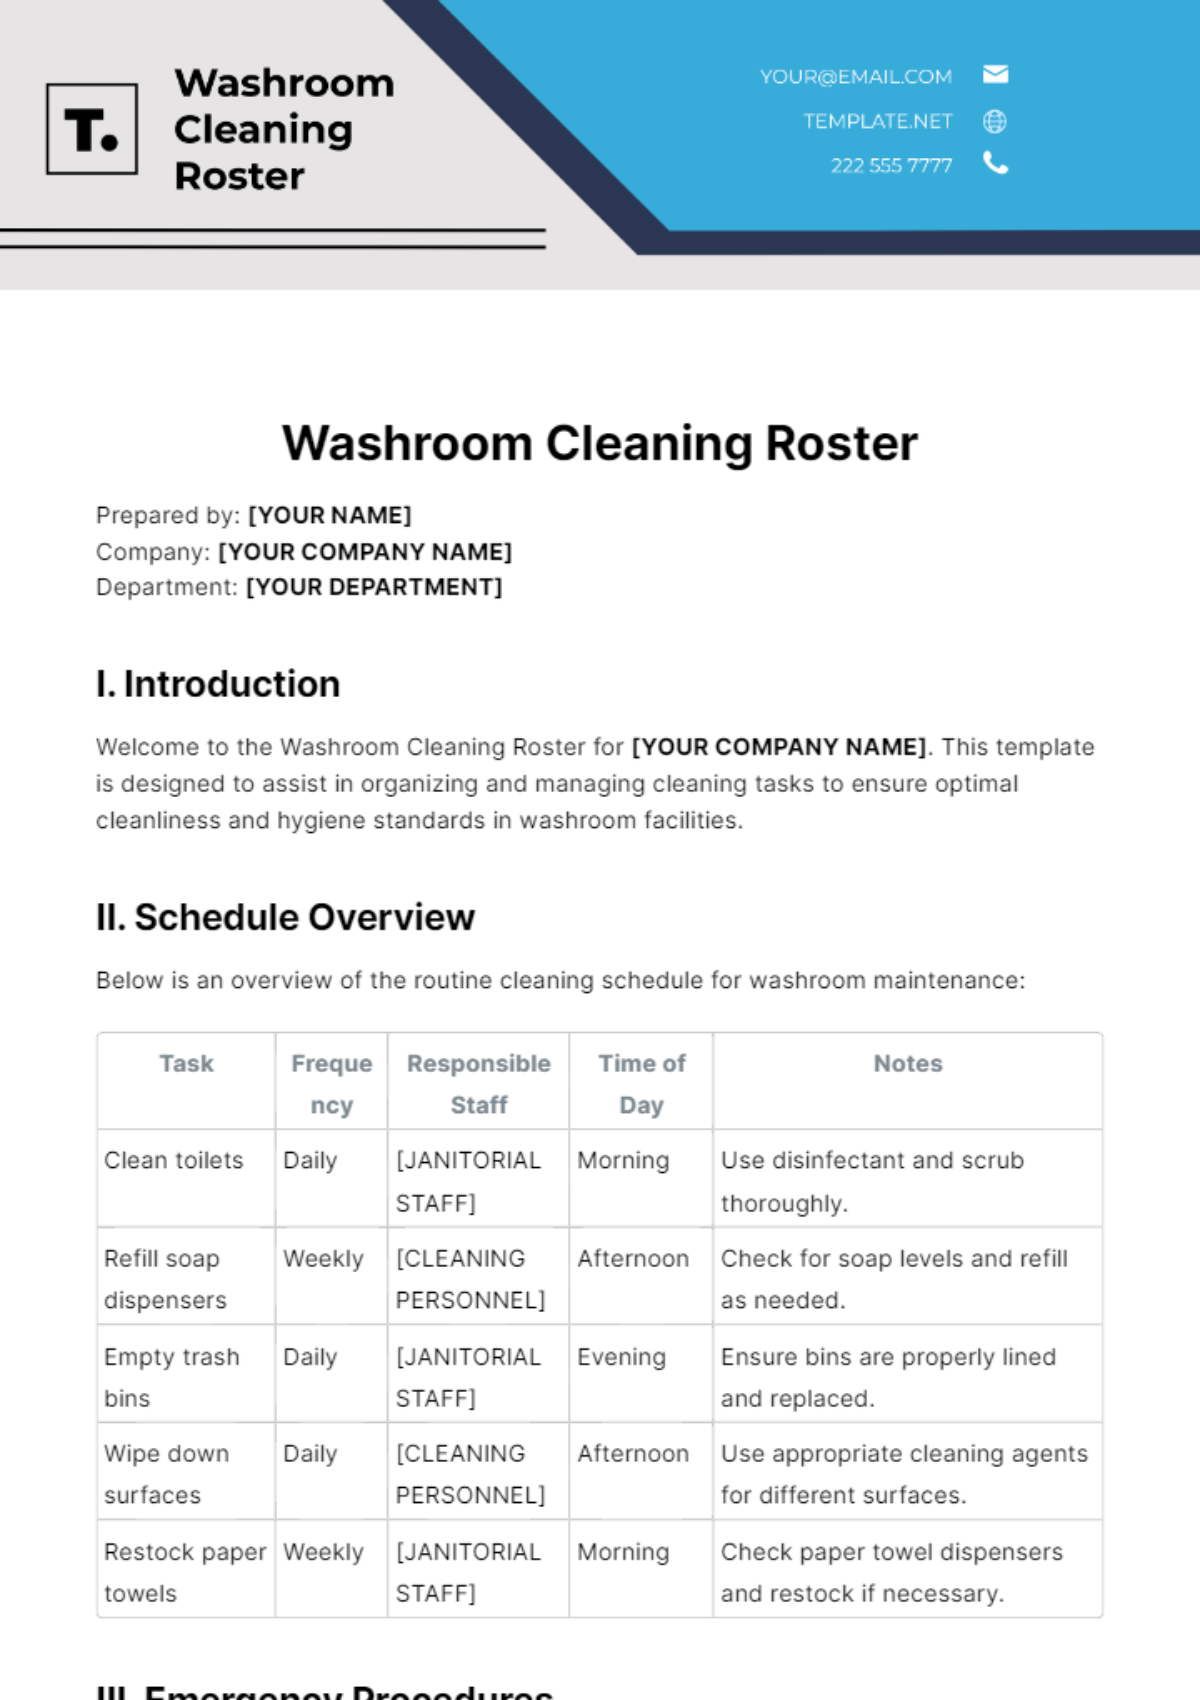 Washroom Cleaning Roster Template